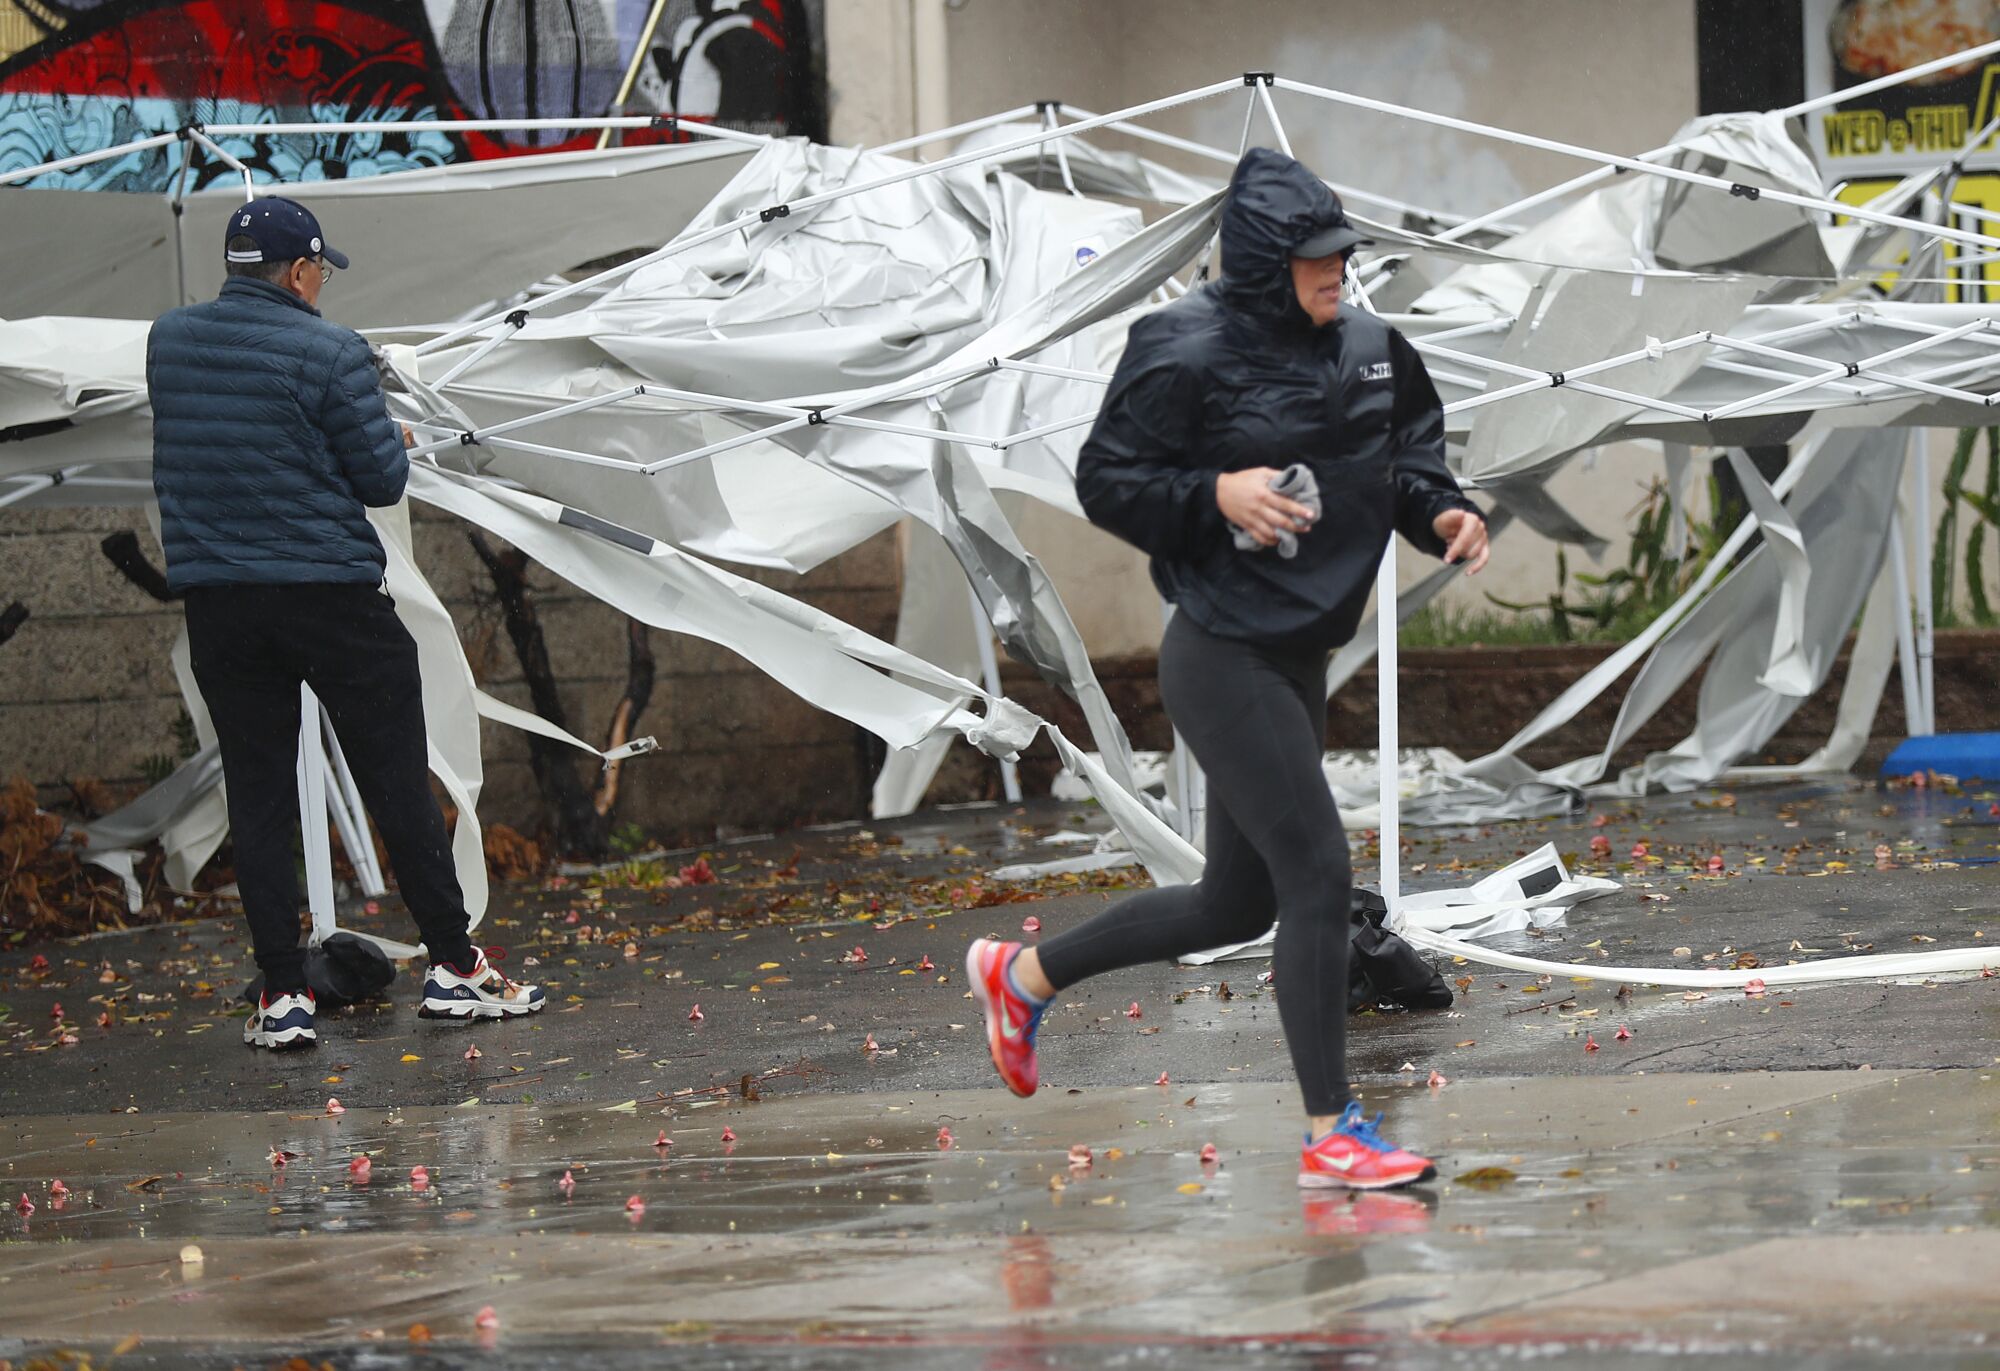 A jogger runs by a worker cleaning up the top to a canopy that blew apart at a Pacific Beach restaurant in high winds.